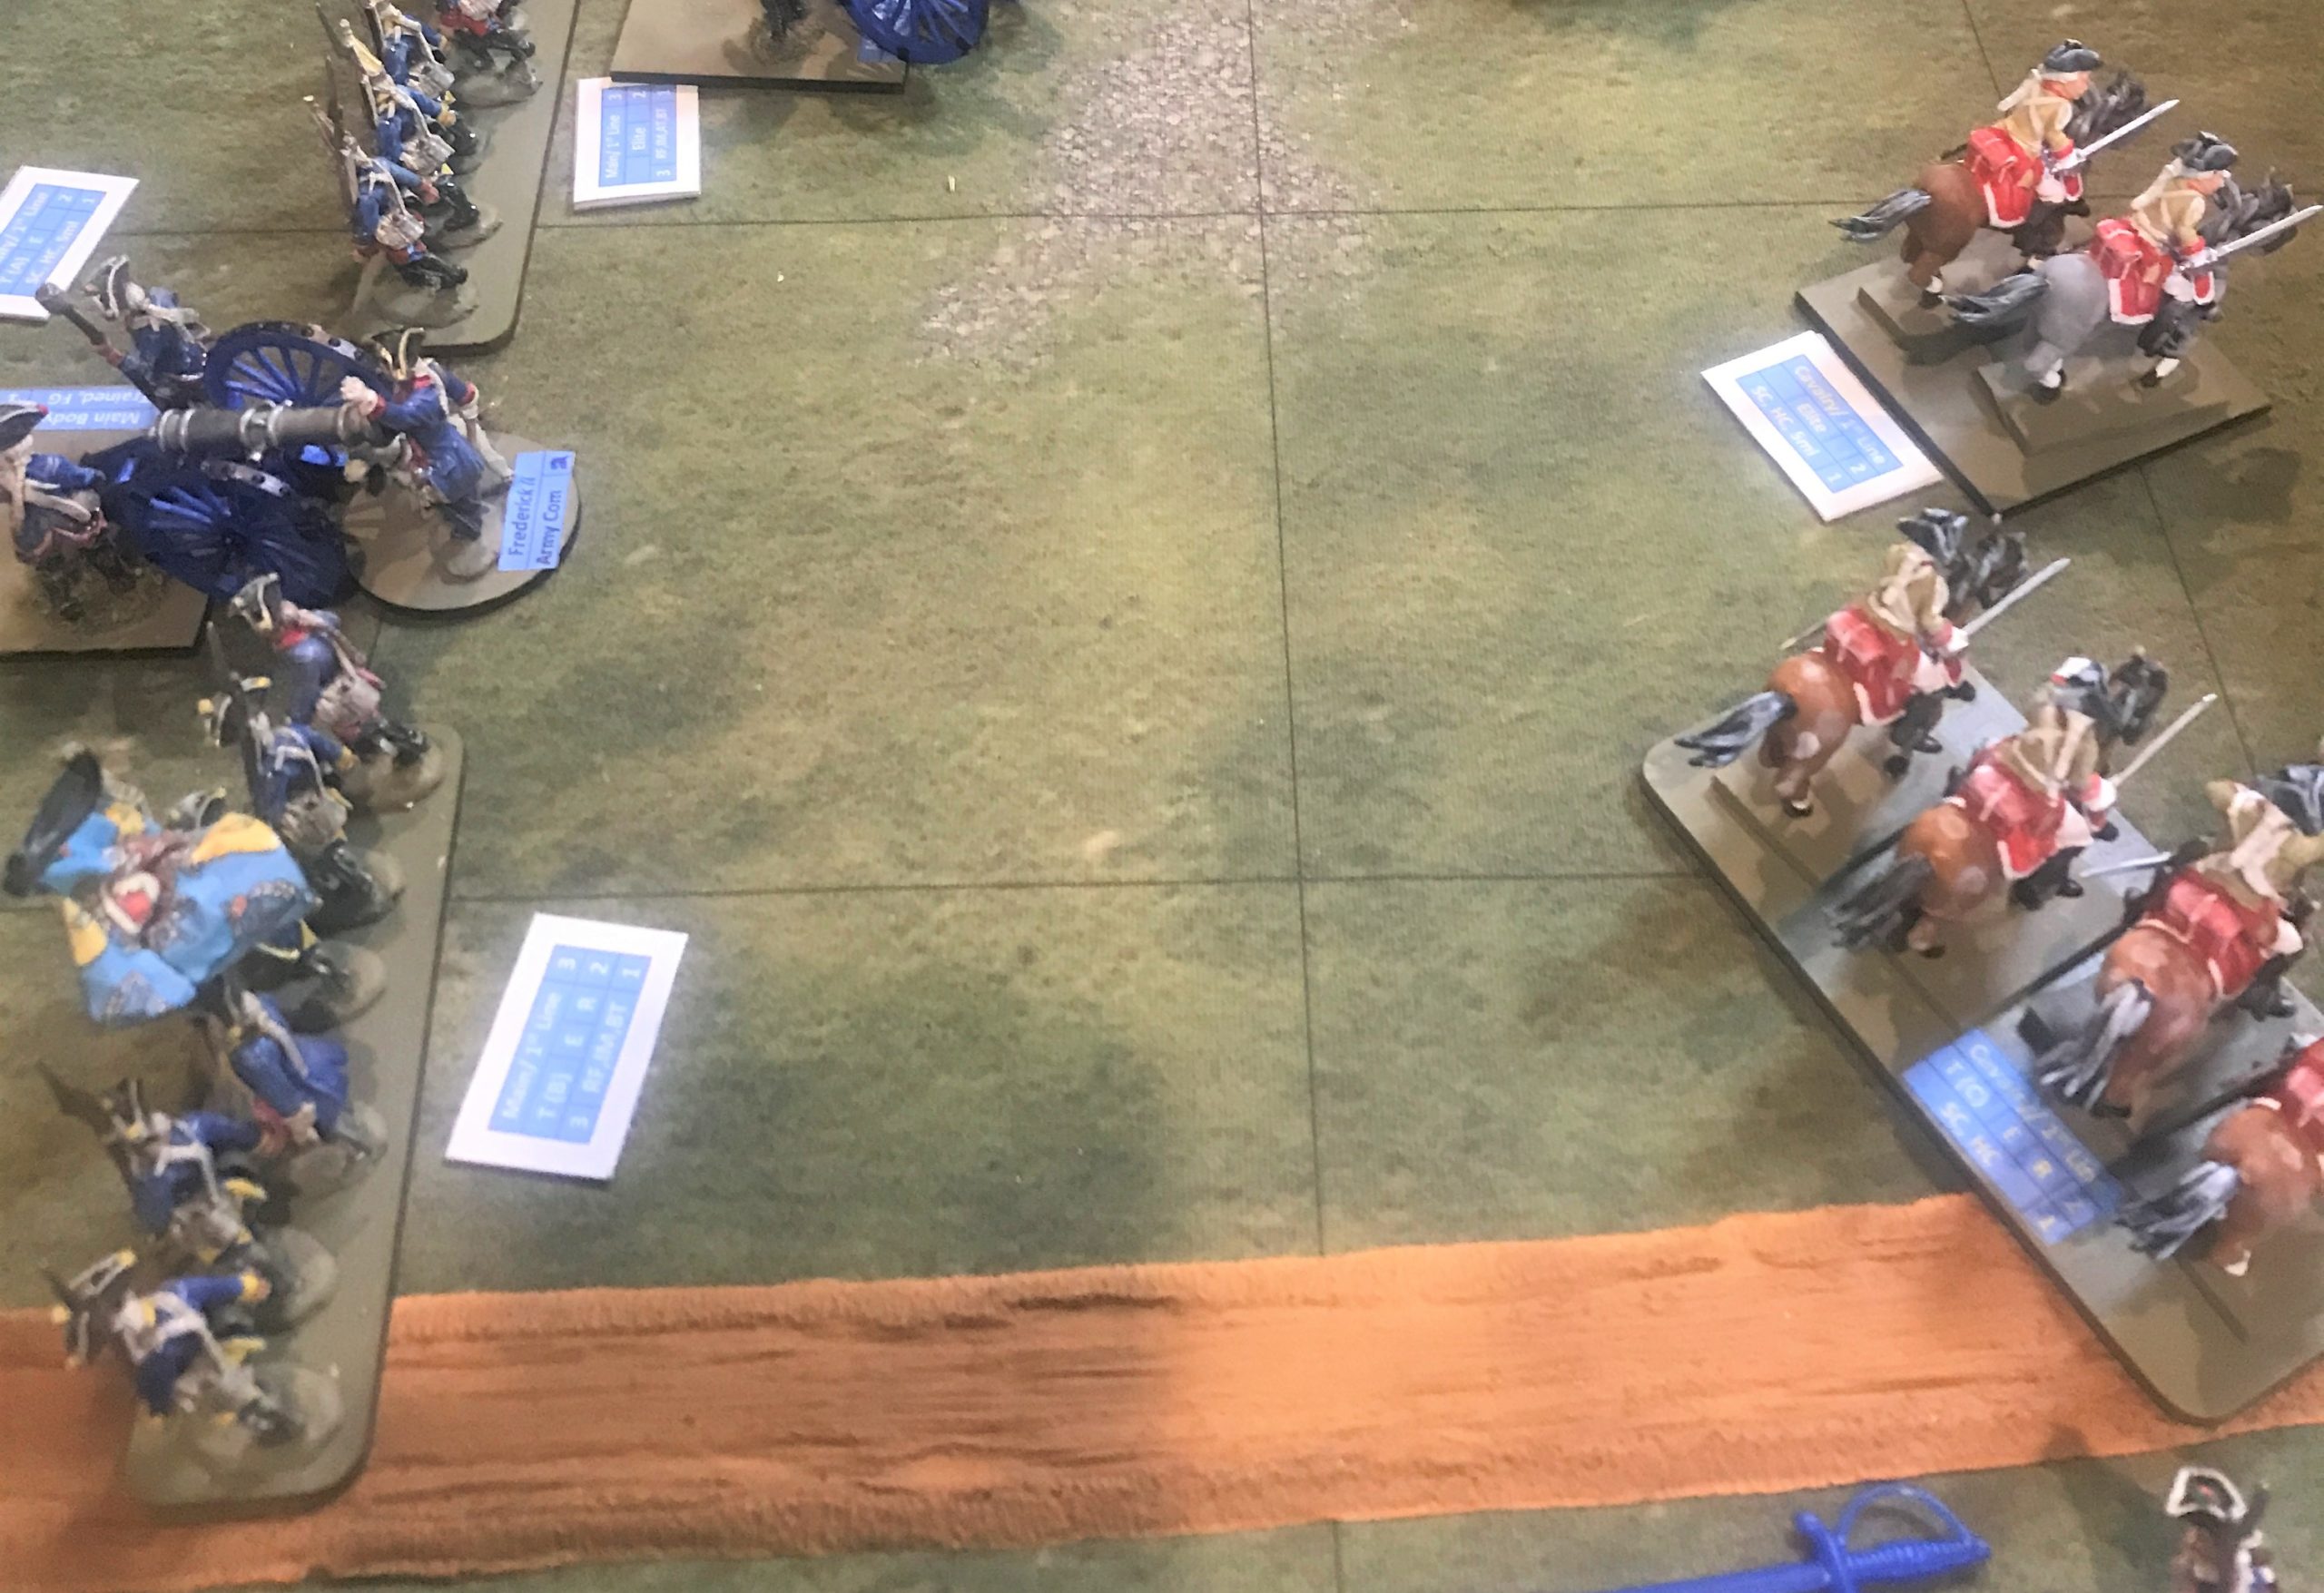 Day of Battle Games POD